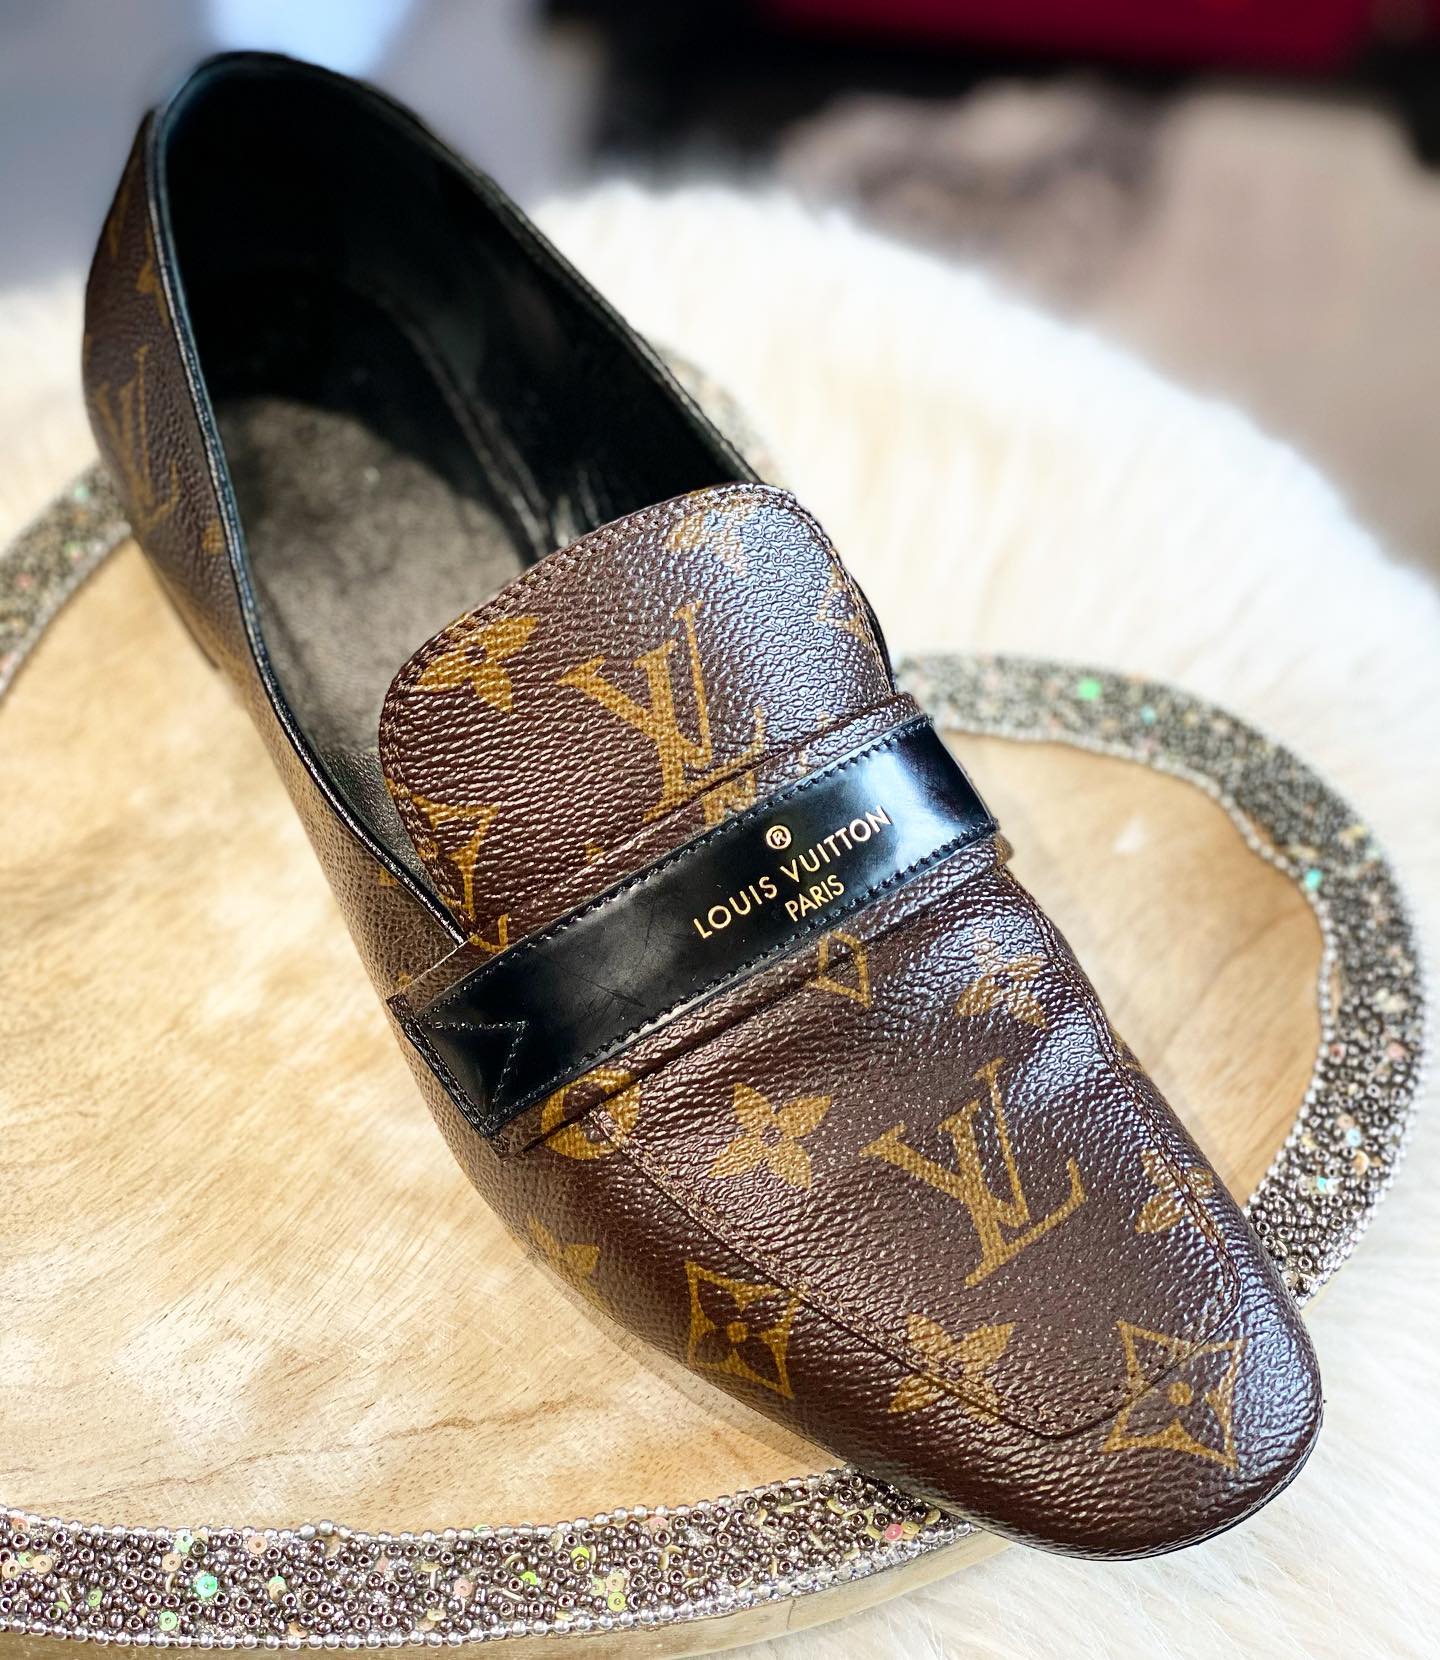 LOUIS VUITTON MONOGRAM UPPERCASE LOAFERS